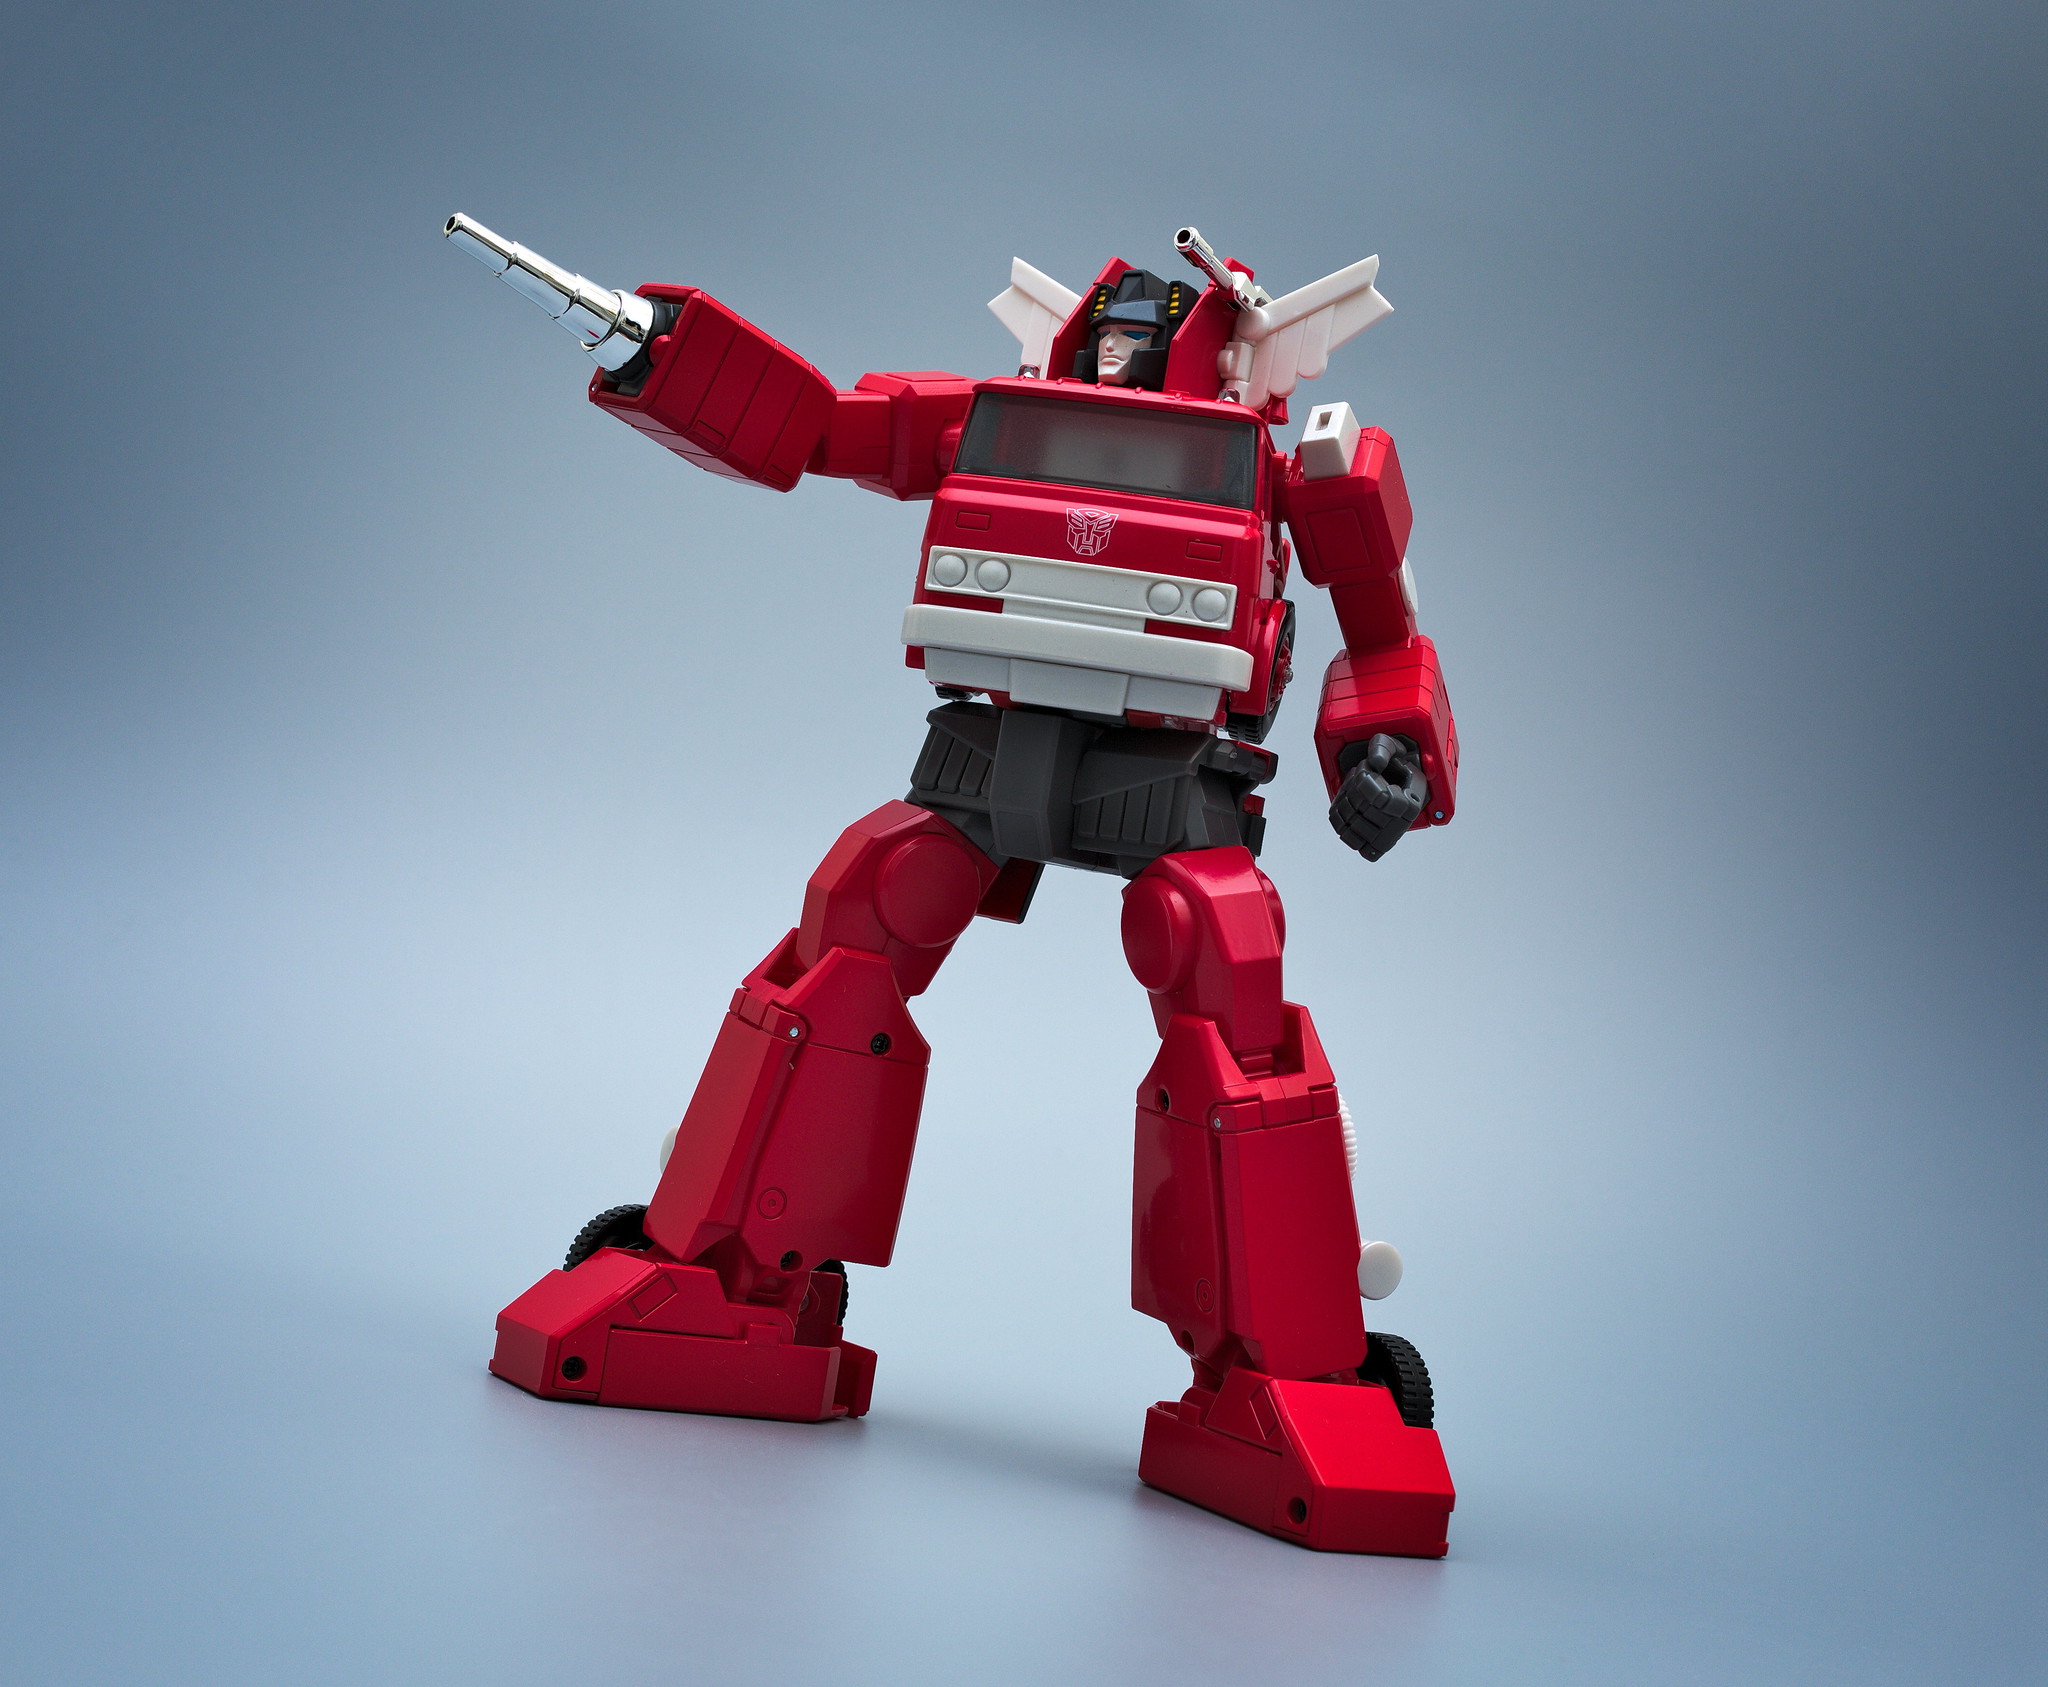 Autobot Inferno with a silver wrist barrel attachment in replacement of his right fist